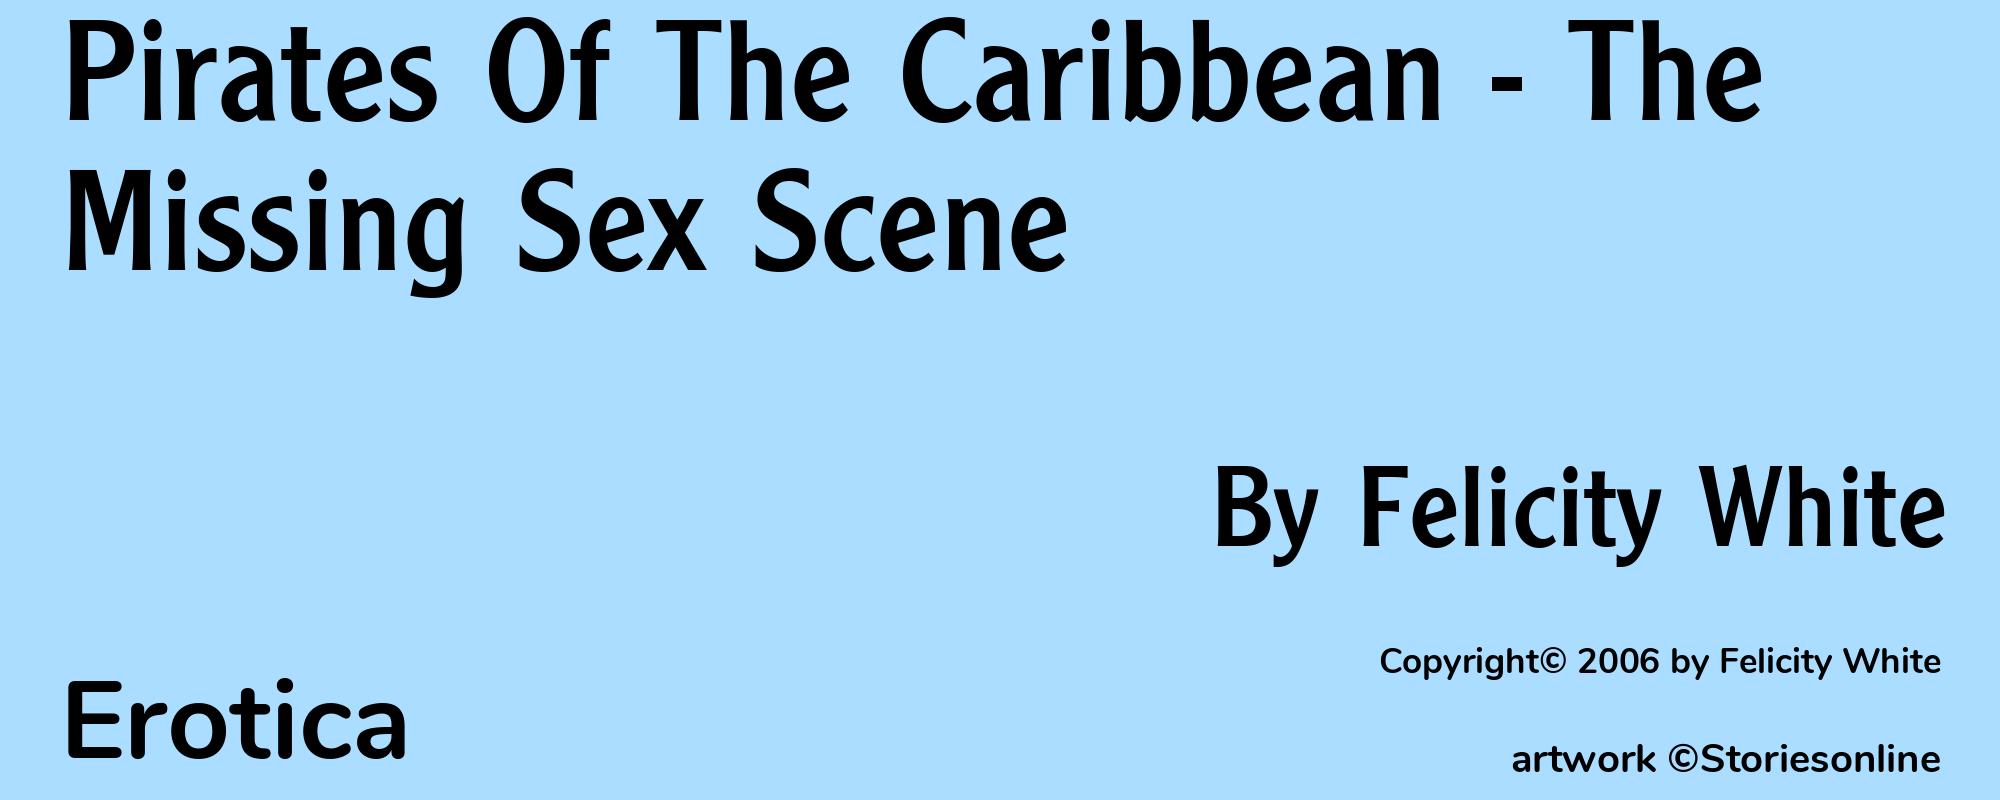 Pirates Of The Caribbean - The Missing Sex Scene - Cover